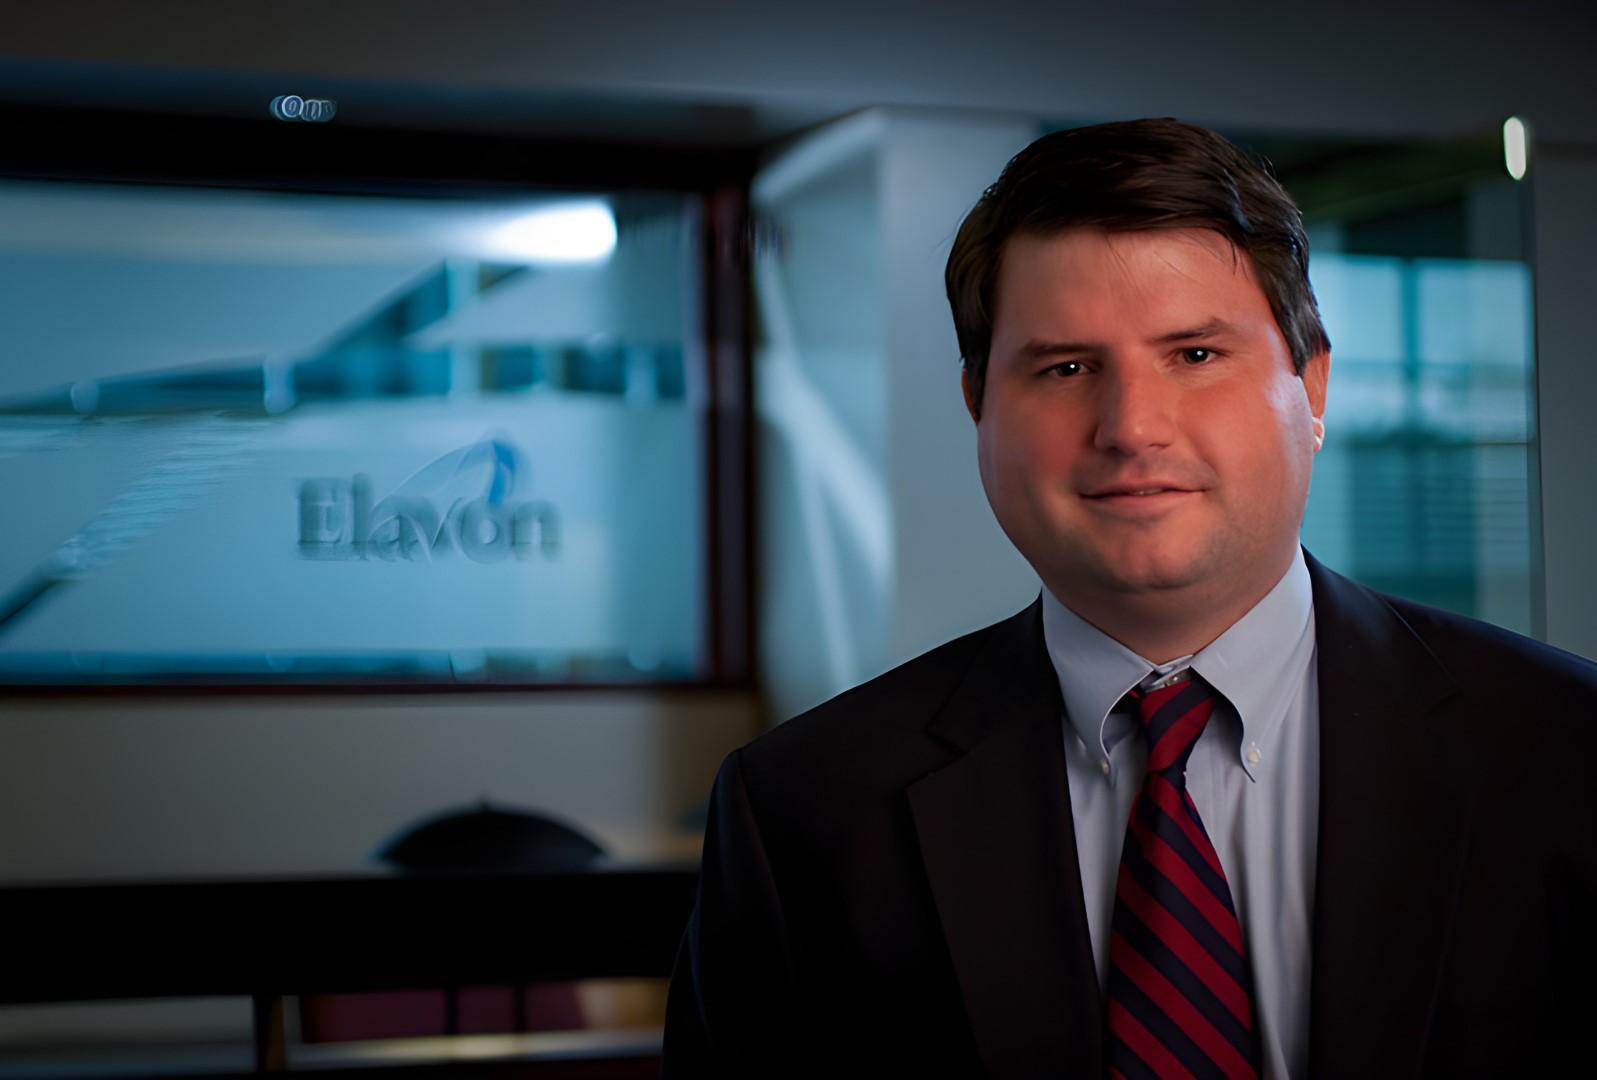 Elavon Inc. | Intelligent End-to-end Payment Processing Solutions & Services | Jamie Walker